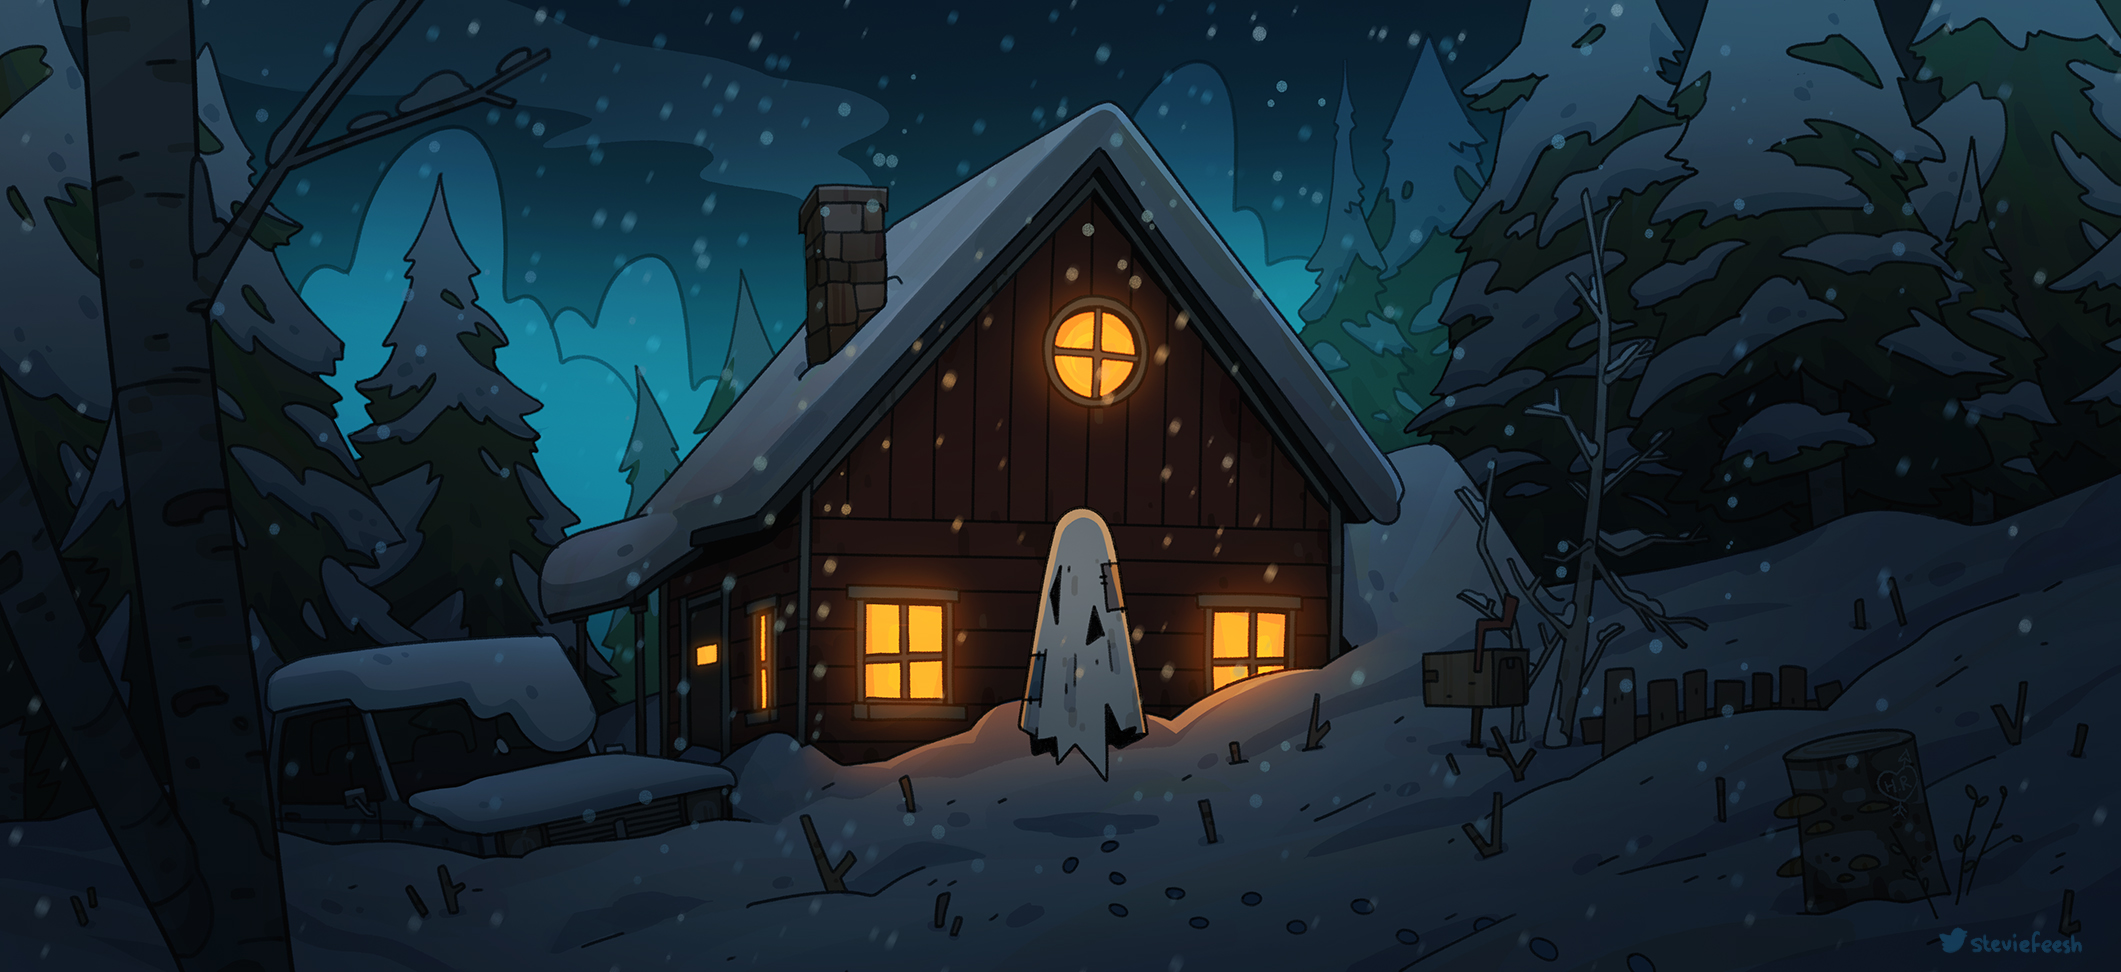 Steviefeesh Ghost Snow Trees Forest Cottage Chimneys Night 2121x972